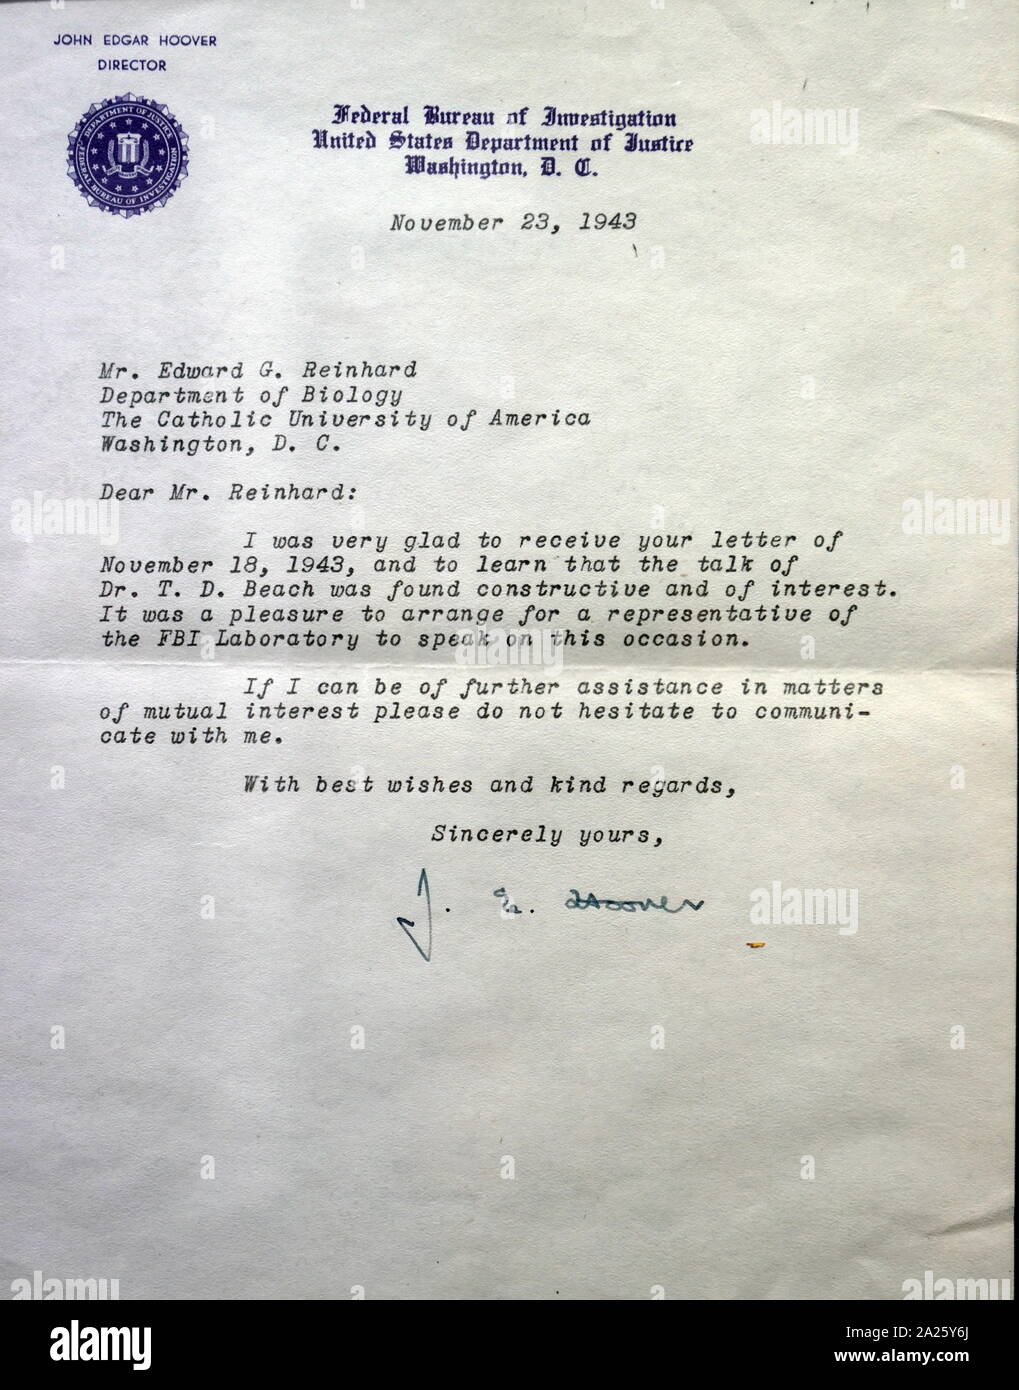 Letter Signed By J Edgar Hoover With The Fbi Letterhead John Edgar Hoover 15 1972 The First Director Of The Federal Bureau Of Investigation Of The United States Stock Photo Alamy